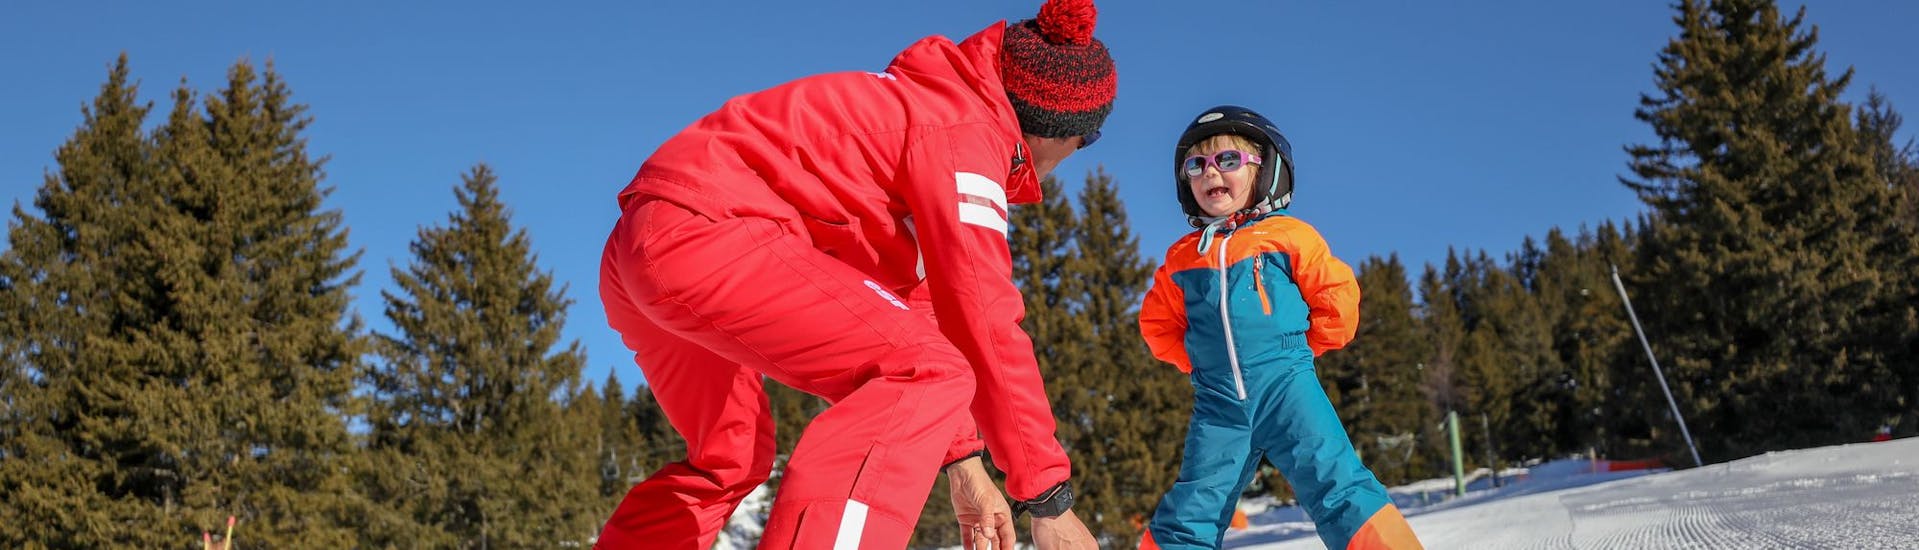 An instructor of the Ski School ESF Valmorel coaches a child during private ski lessons for kids.